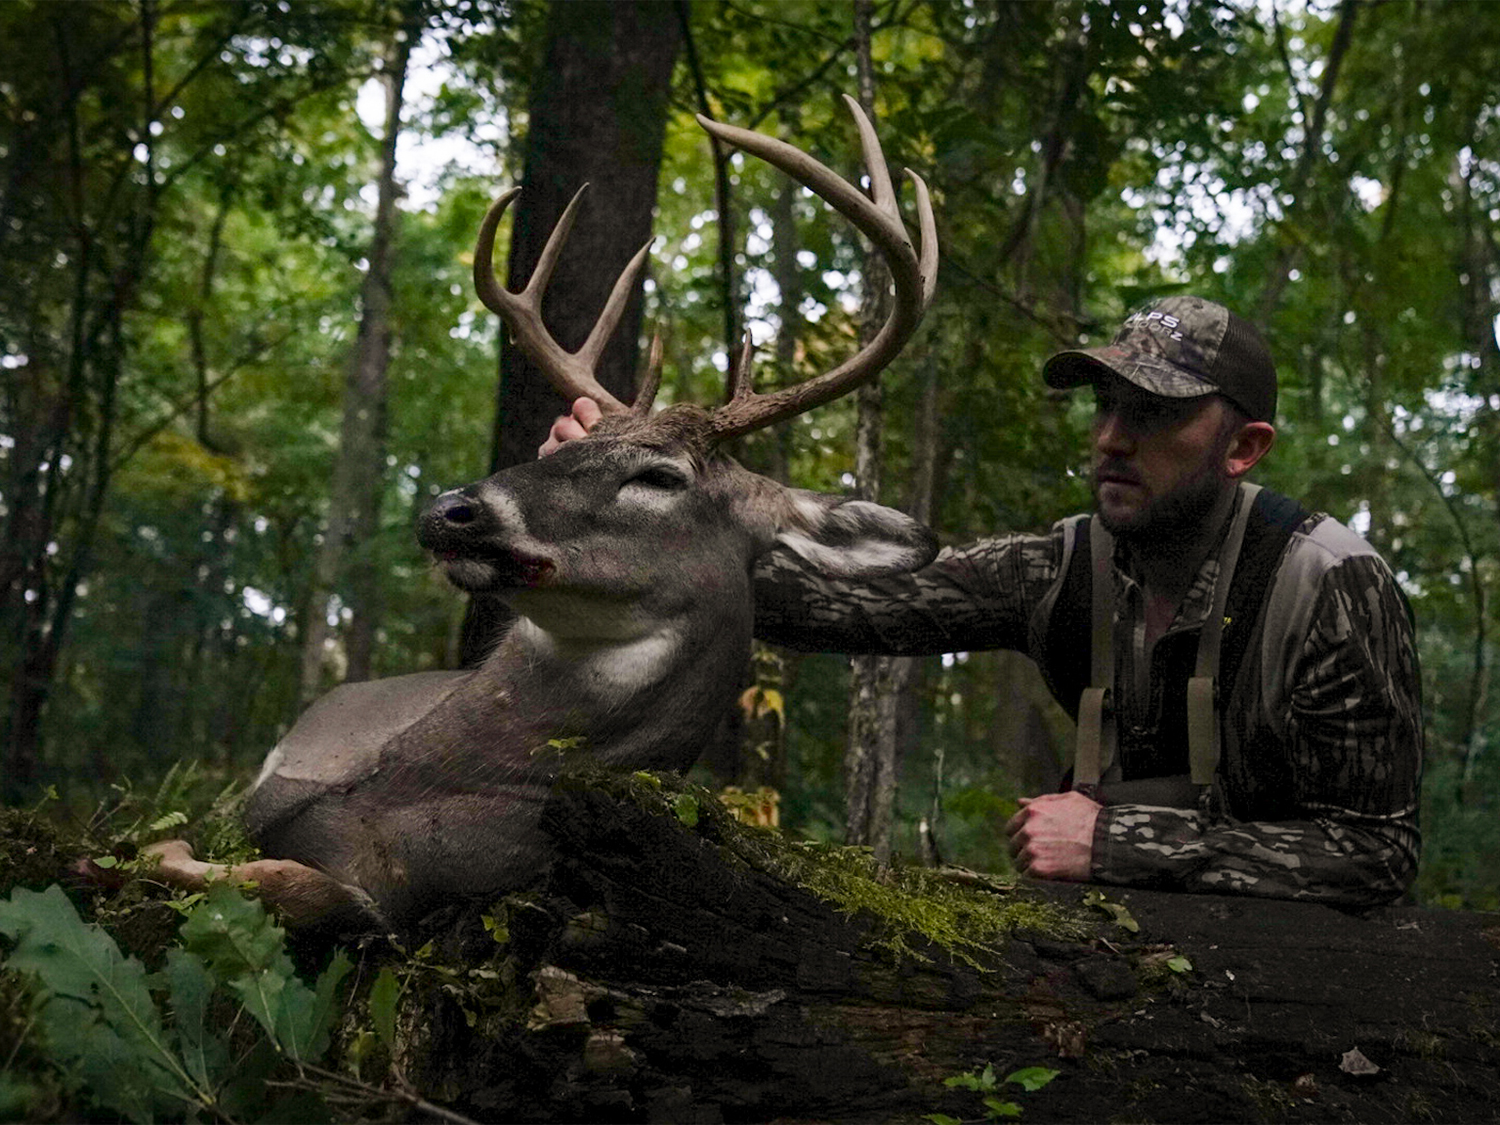 A man in full camo holds up the head of a whitetail buck by the antlers. They are in a lush, overgrown wooded area surrounded by trees, bushes, and other flora.